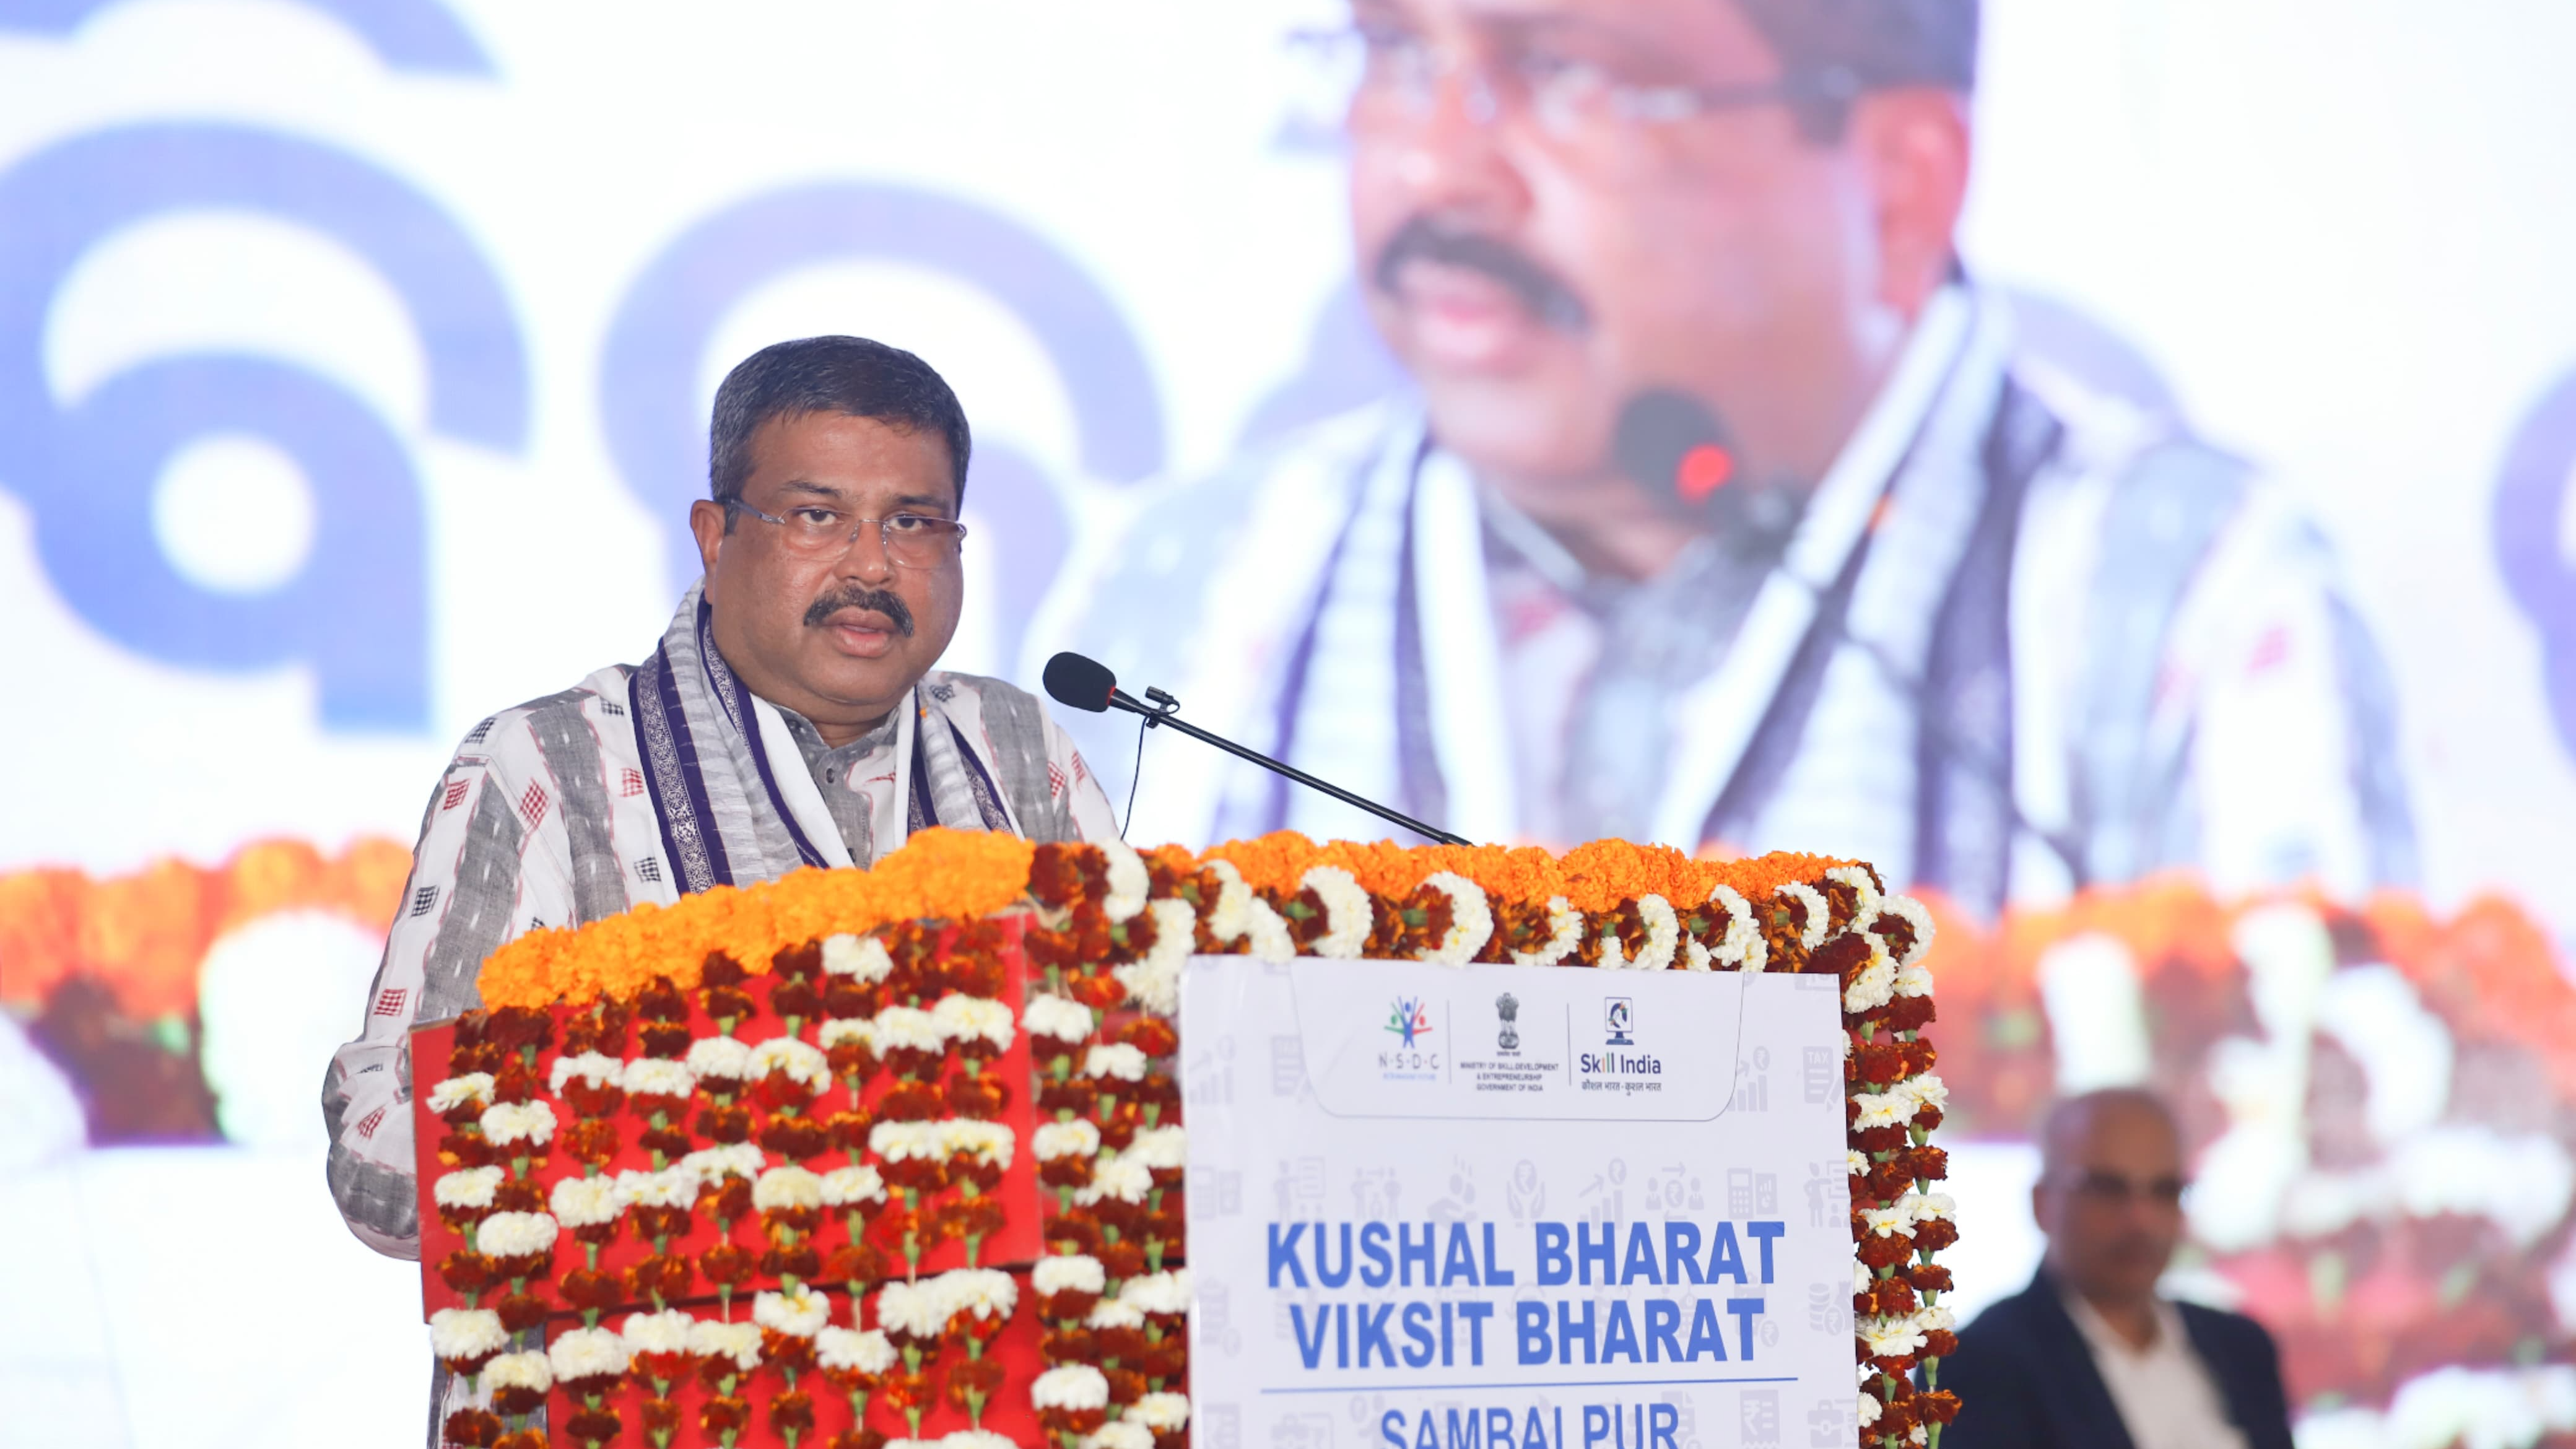 Dharmendra Pradhan, Union Minister of Education and Skill Development and Entrepreneurship on Sunday said the government's resolute dedication to shaping a Viksit Bharat is vividly demonstrated at Kaushal Mahotsav 